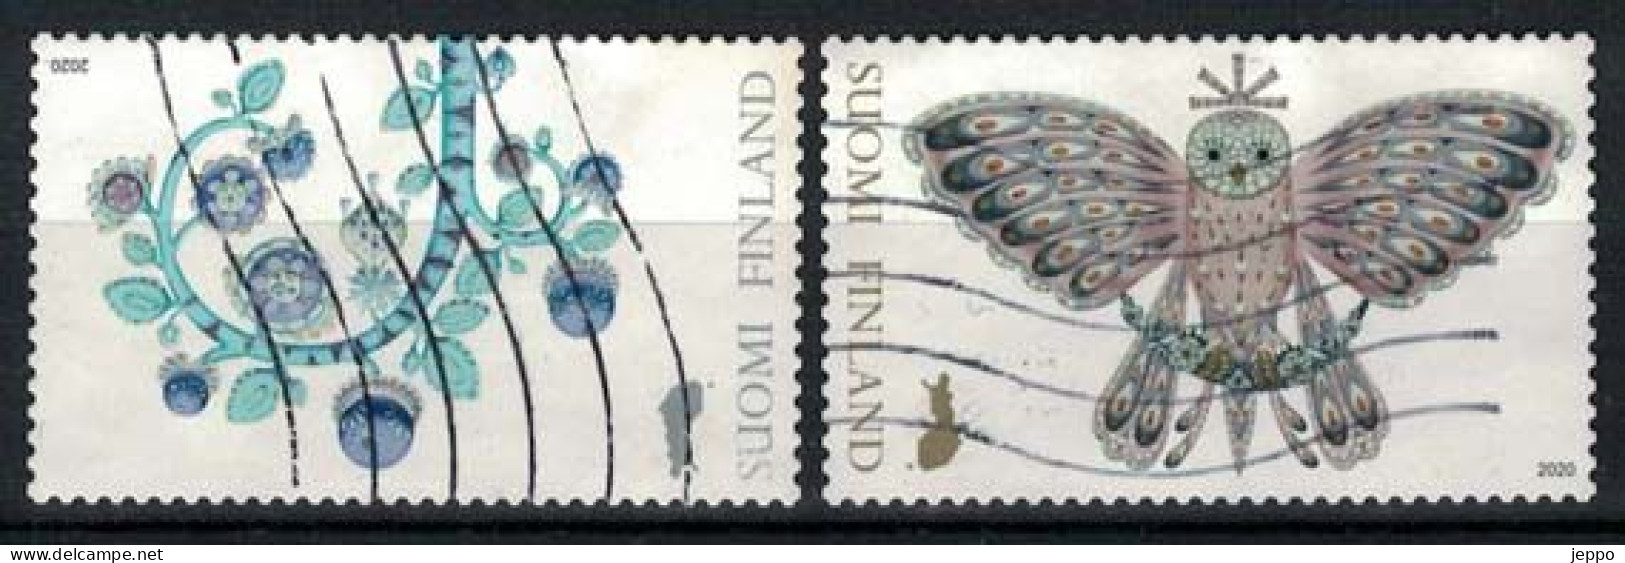 2020 Finland, Enchanted Forest, Complete Used Set. - Usati